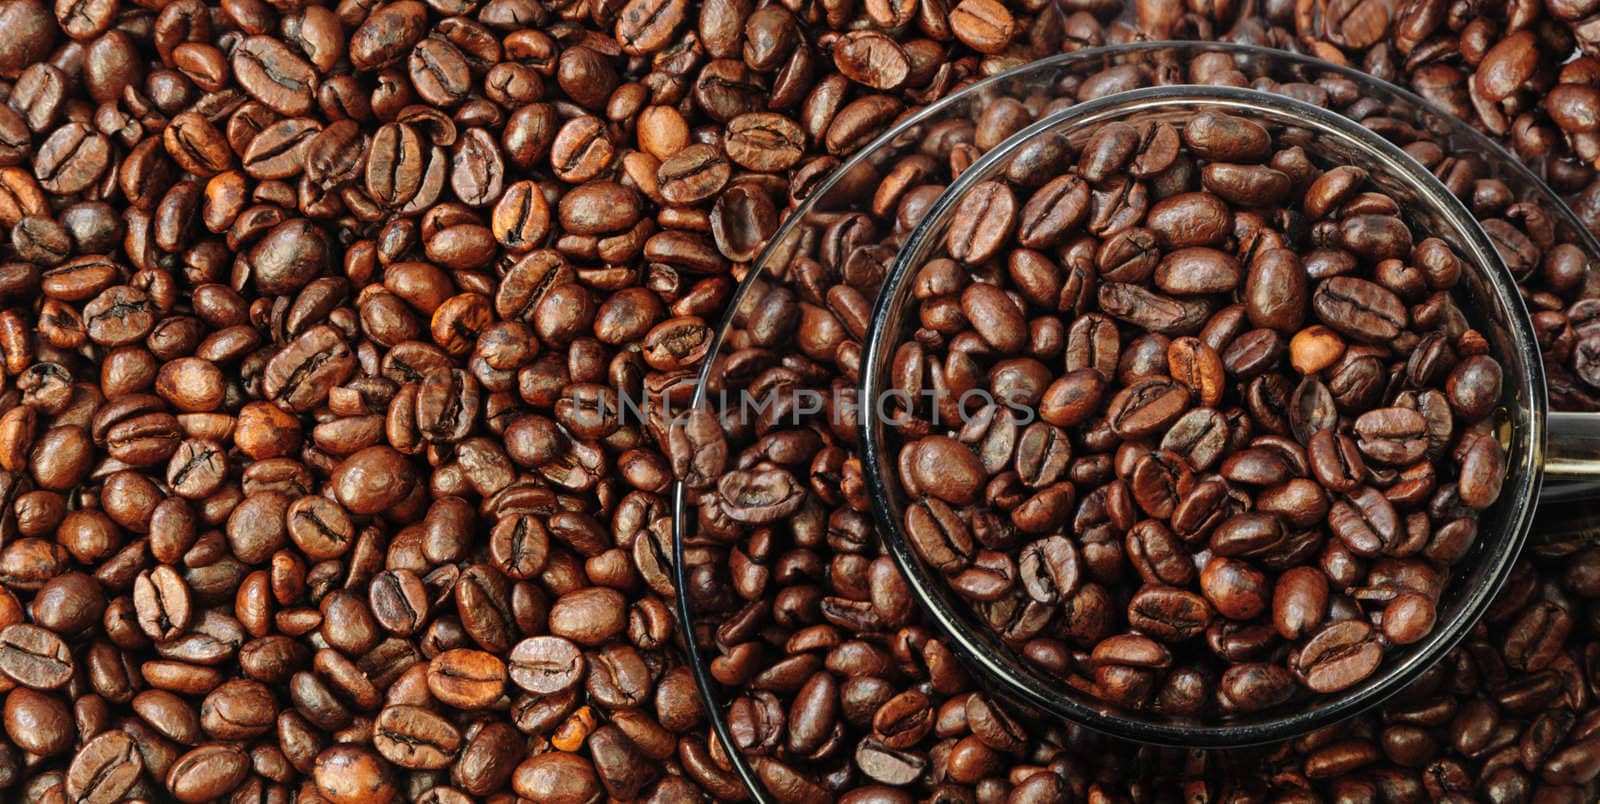 there are outlines of cup and saucer in-bulk coffee grains as background